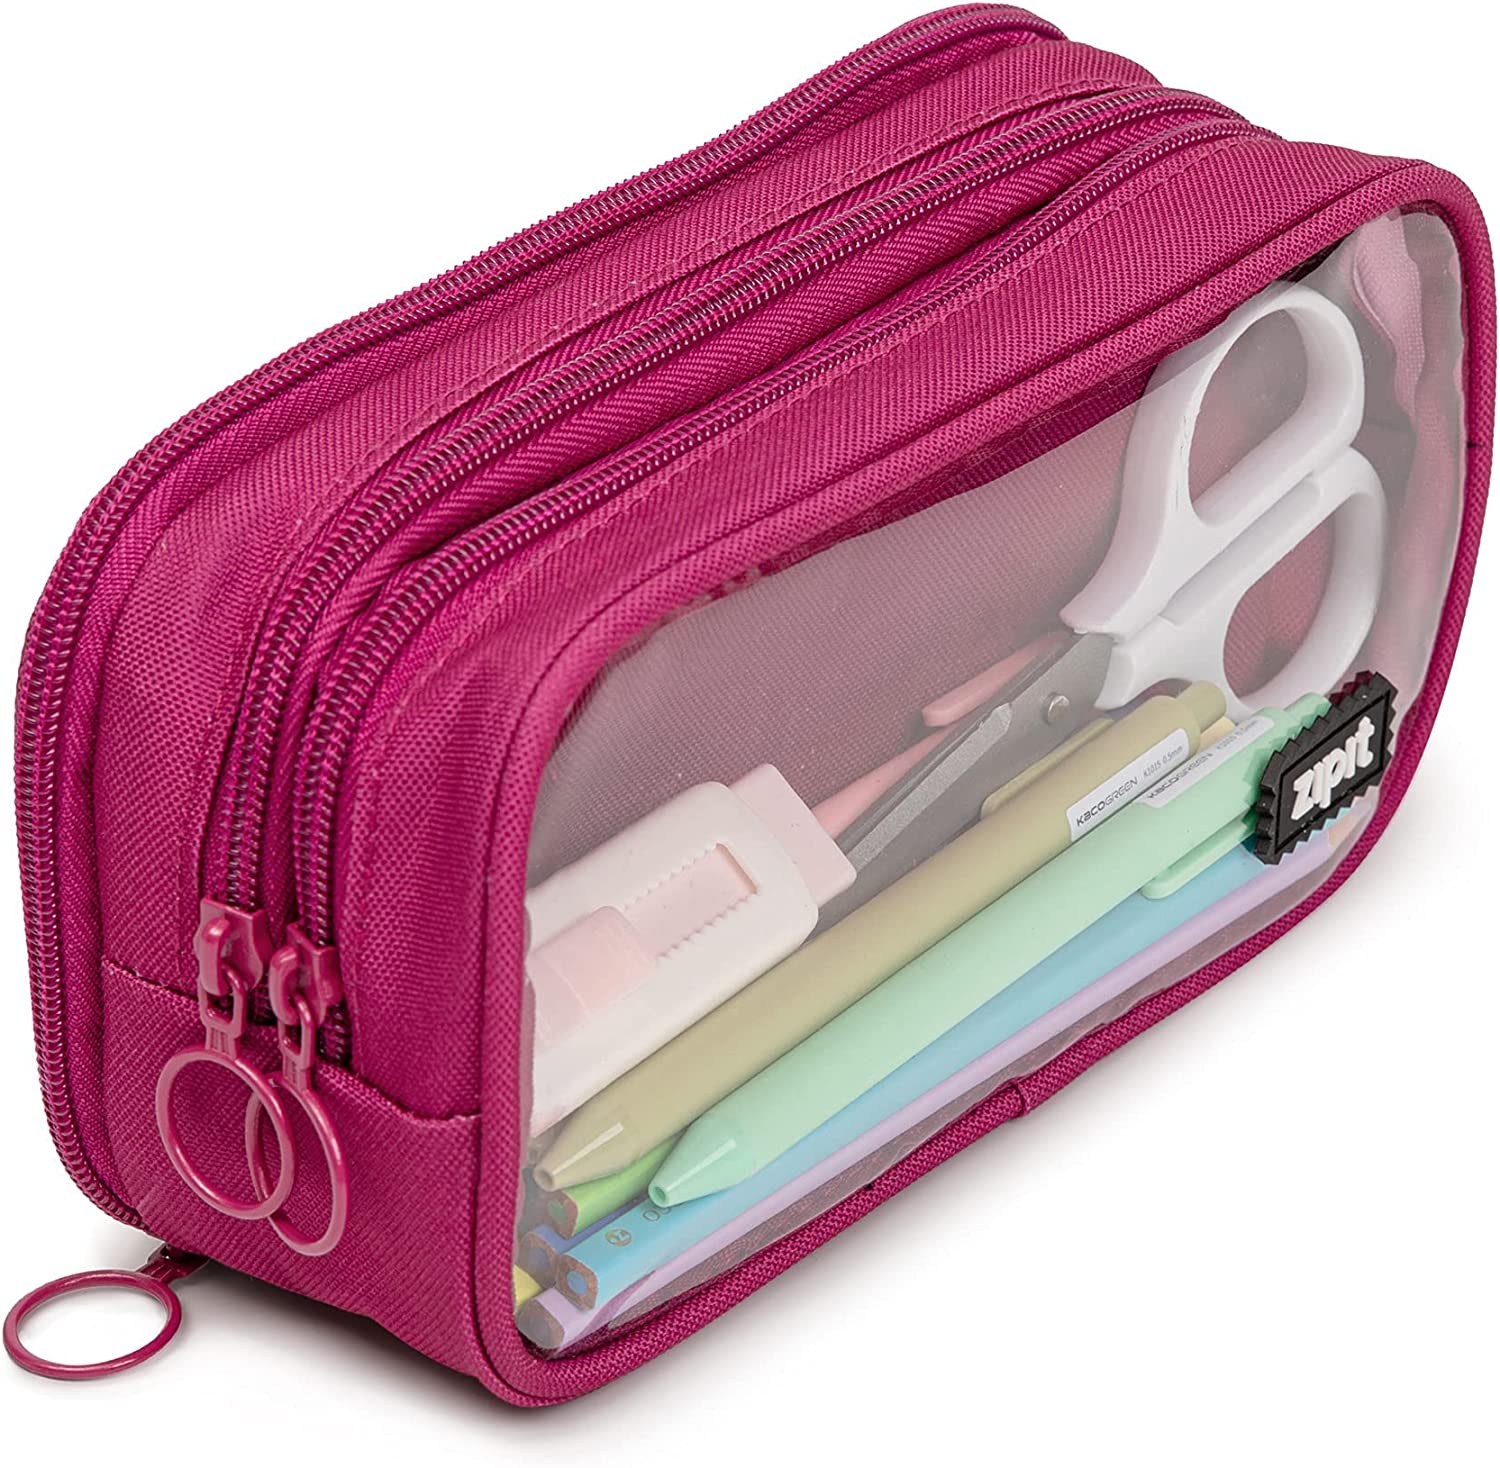 WEMATE Large Pencil Case, Pouch with Zipper Compartments, Light